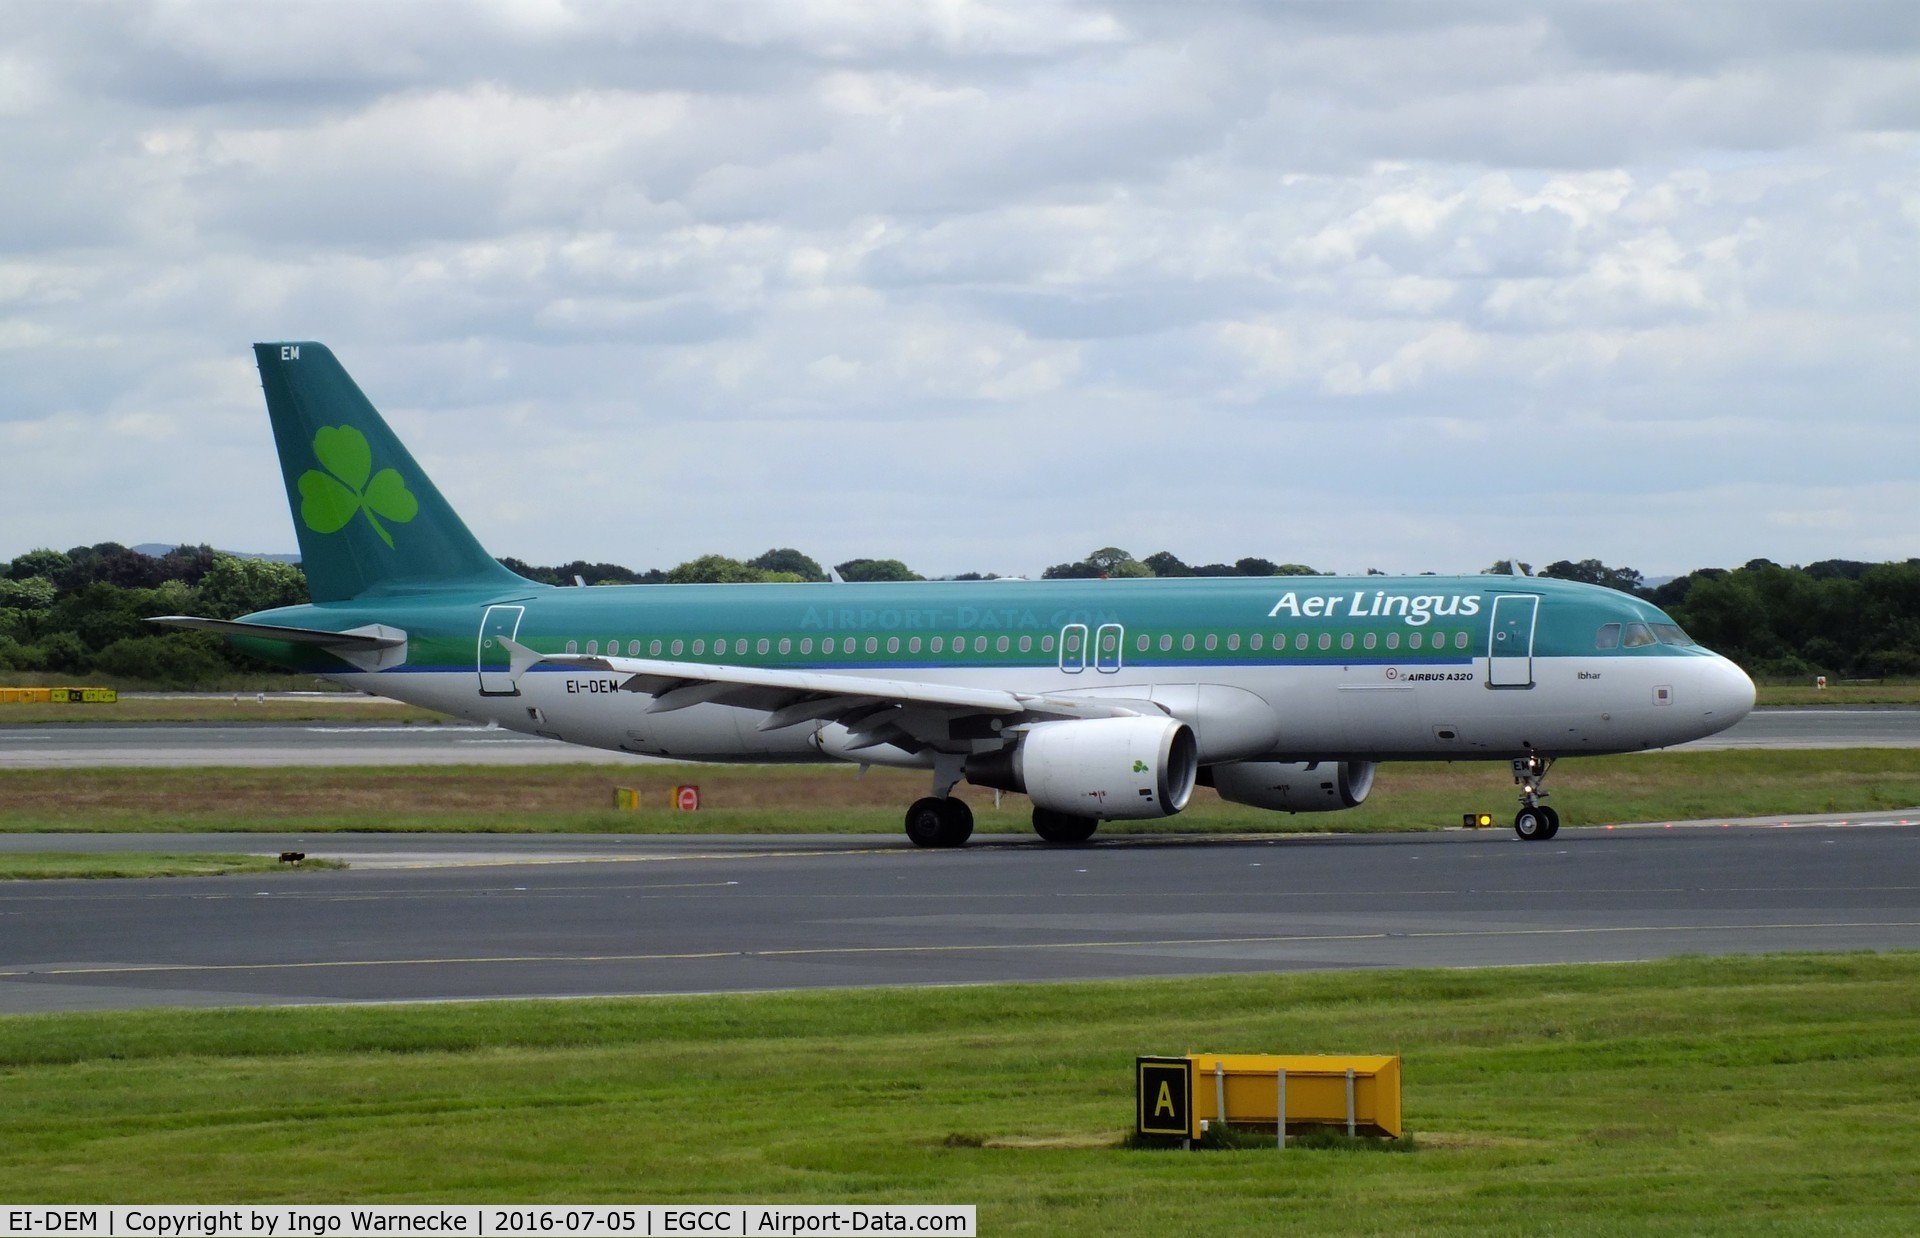 EI-DEM, 2005 Airbus A320-214 C/N 2411, Airbus A320-214 of Aer Lingus at Manchester airport